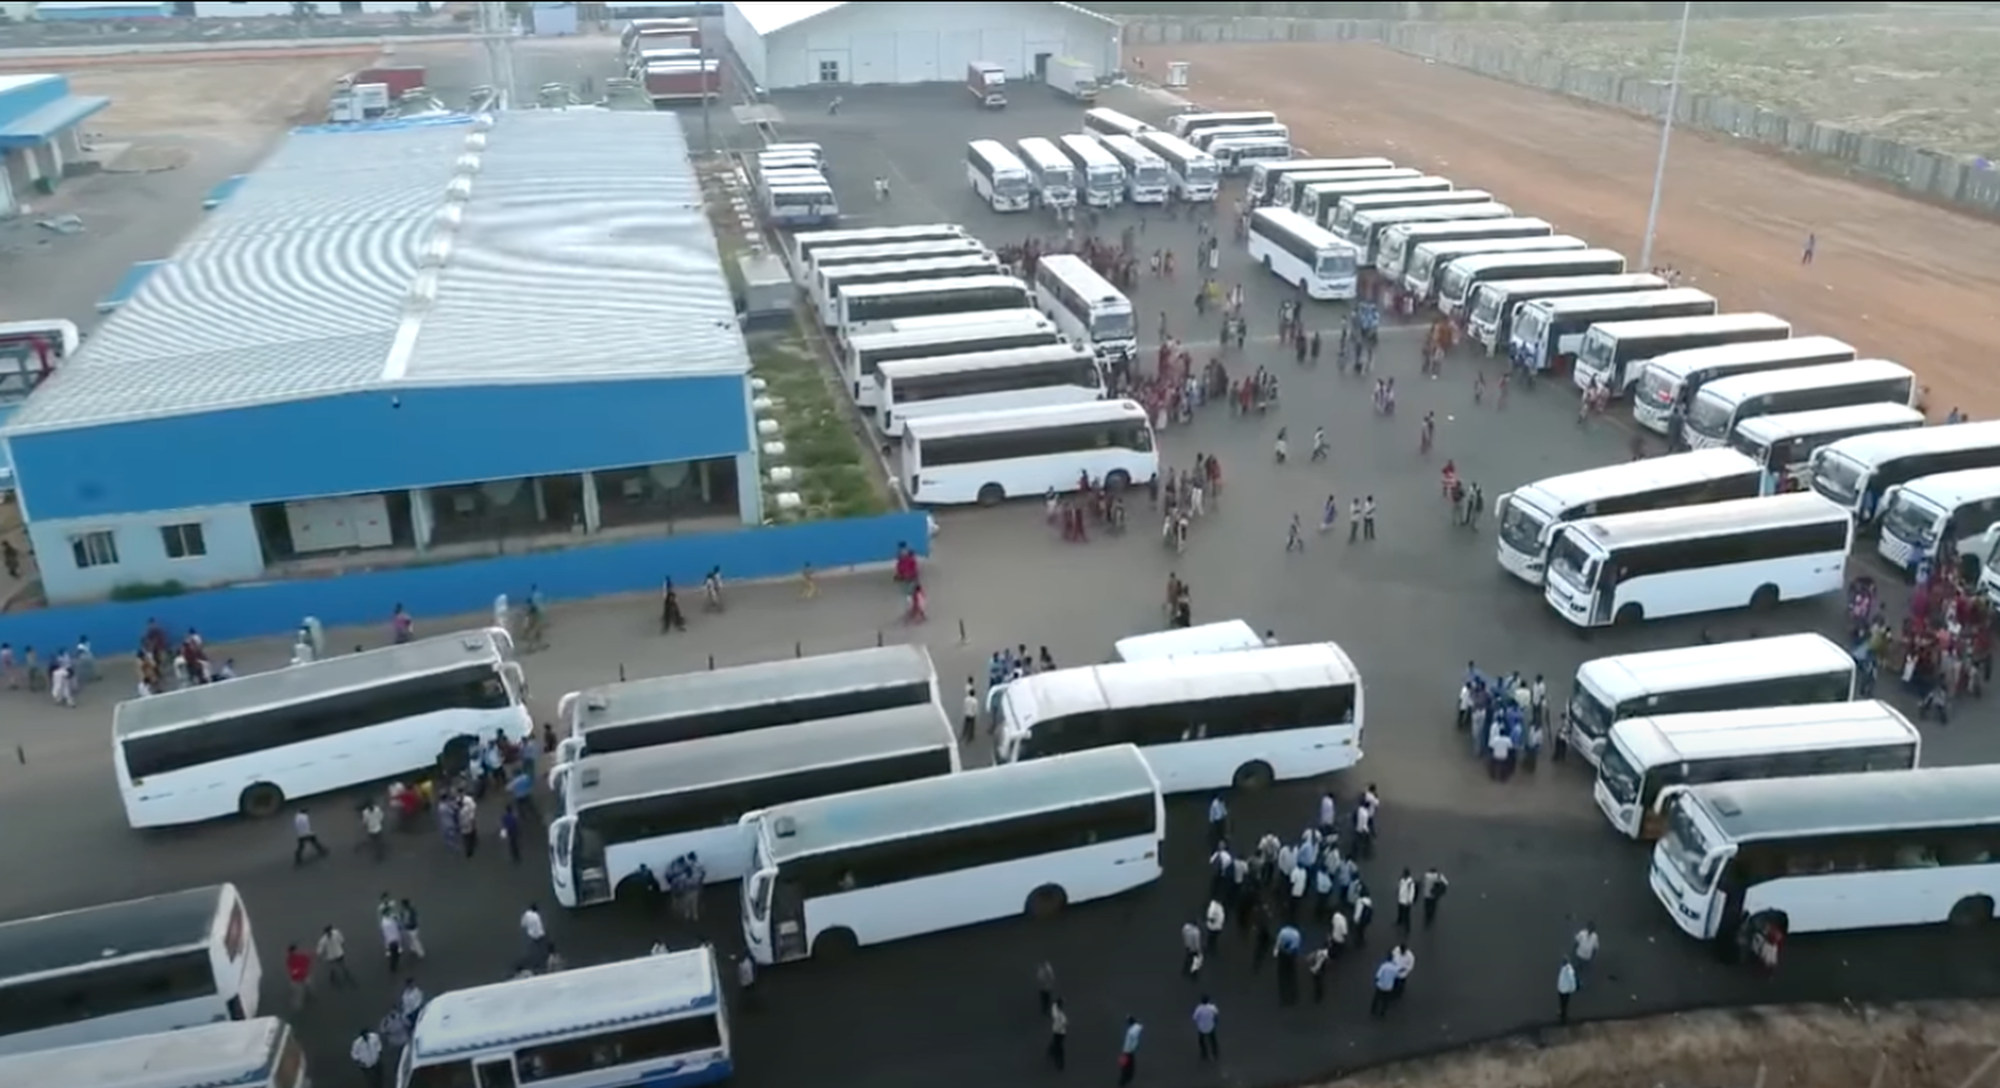 Workers are seen arriving at Foxconn Technology Group’s smartphone manufacturing complex in Sri City, a special economic zone located in Tirupati district in India’s southeastern state of Andhra Pradesh. Photo: YouTube